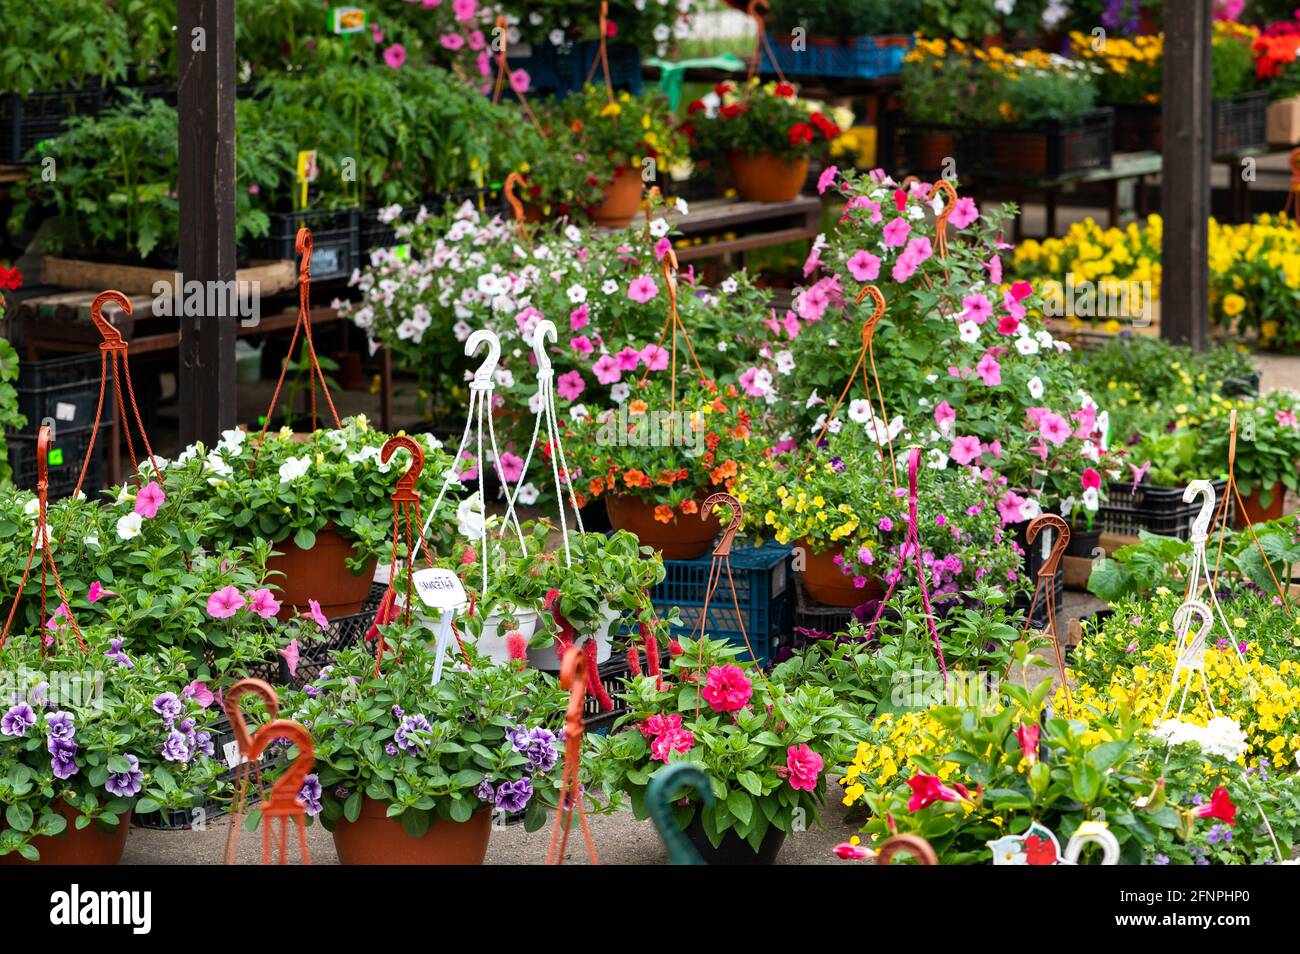 Colourful scene at spring flower market place to buy spring flowers for gardens Stock Photo